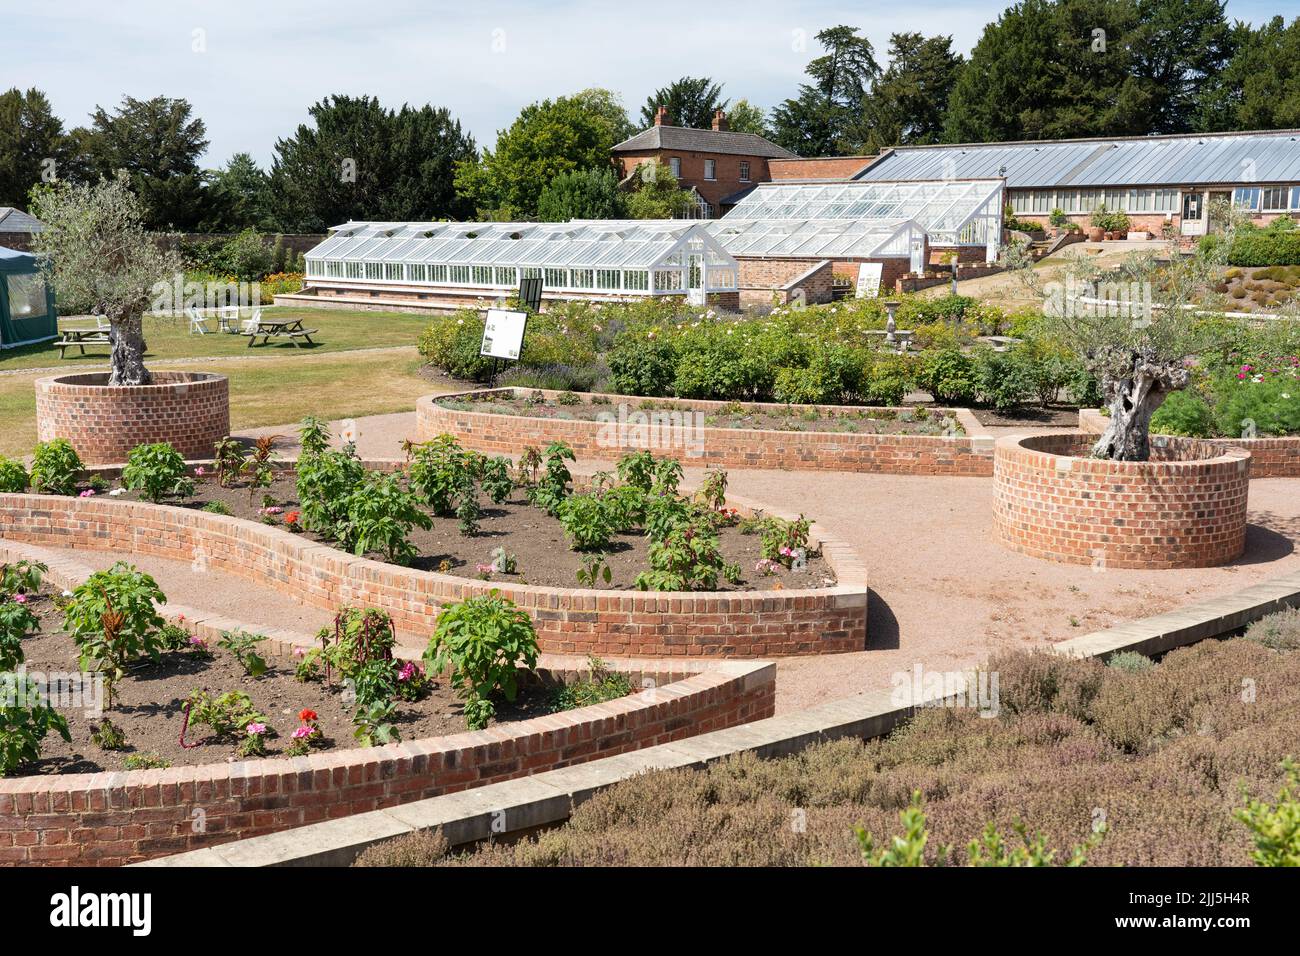 Greenhouses and the 'Mediterranean Garden' in the renovated historic Georgian Walled Gardens of Croome Court, Worcestershire, UK Stock Photo